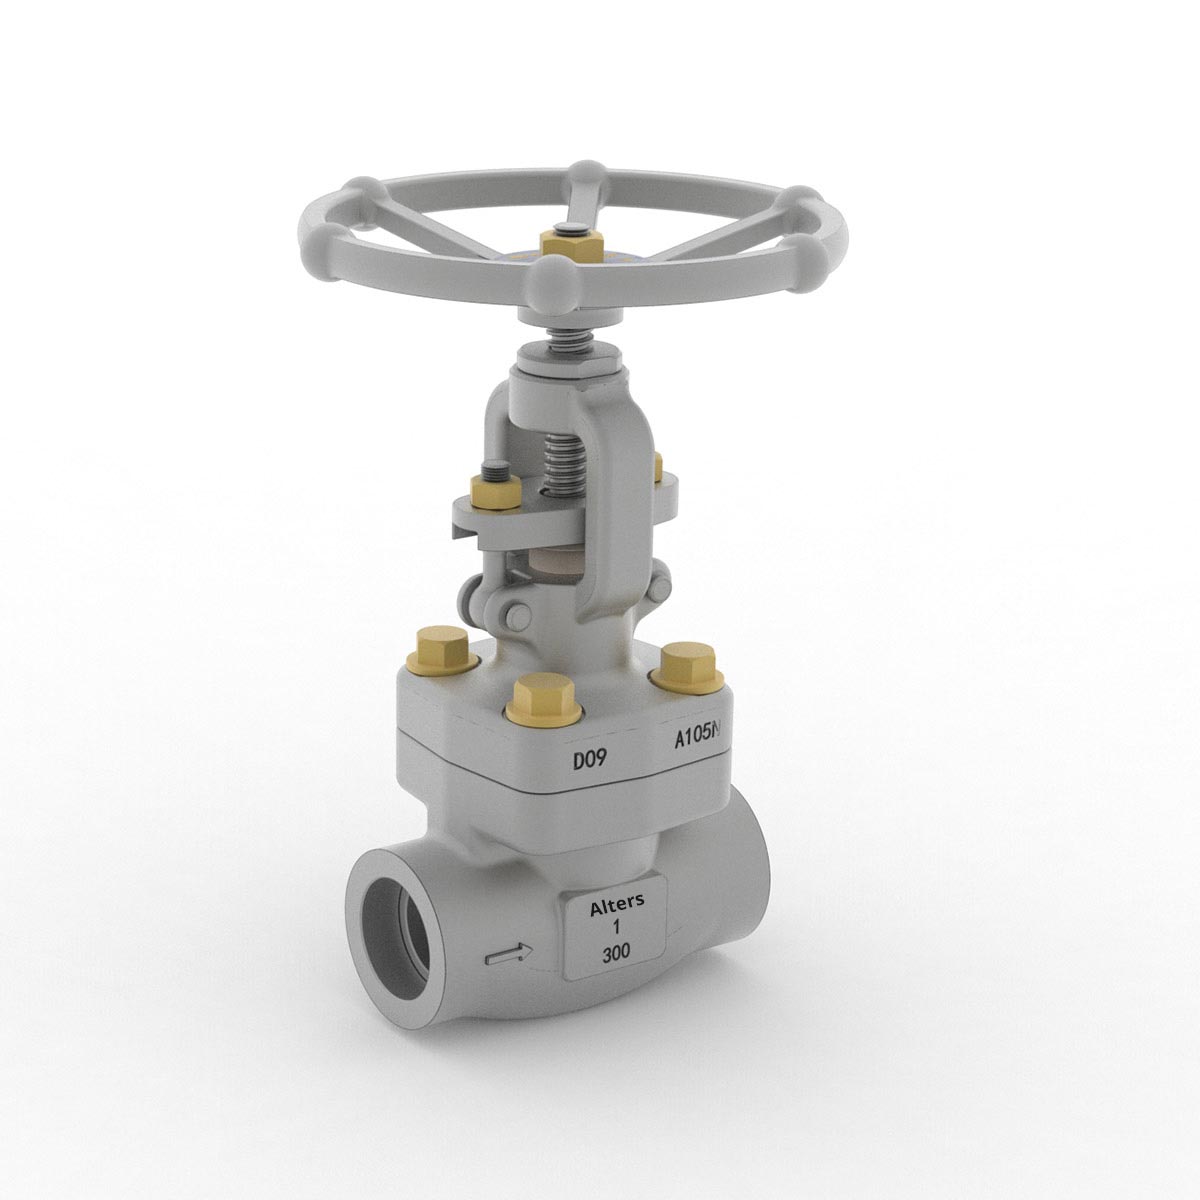 Image of a Forged Steel Globe Valve from AlterValve with the company name and specifications.